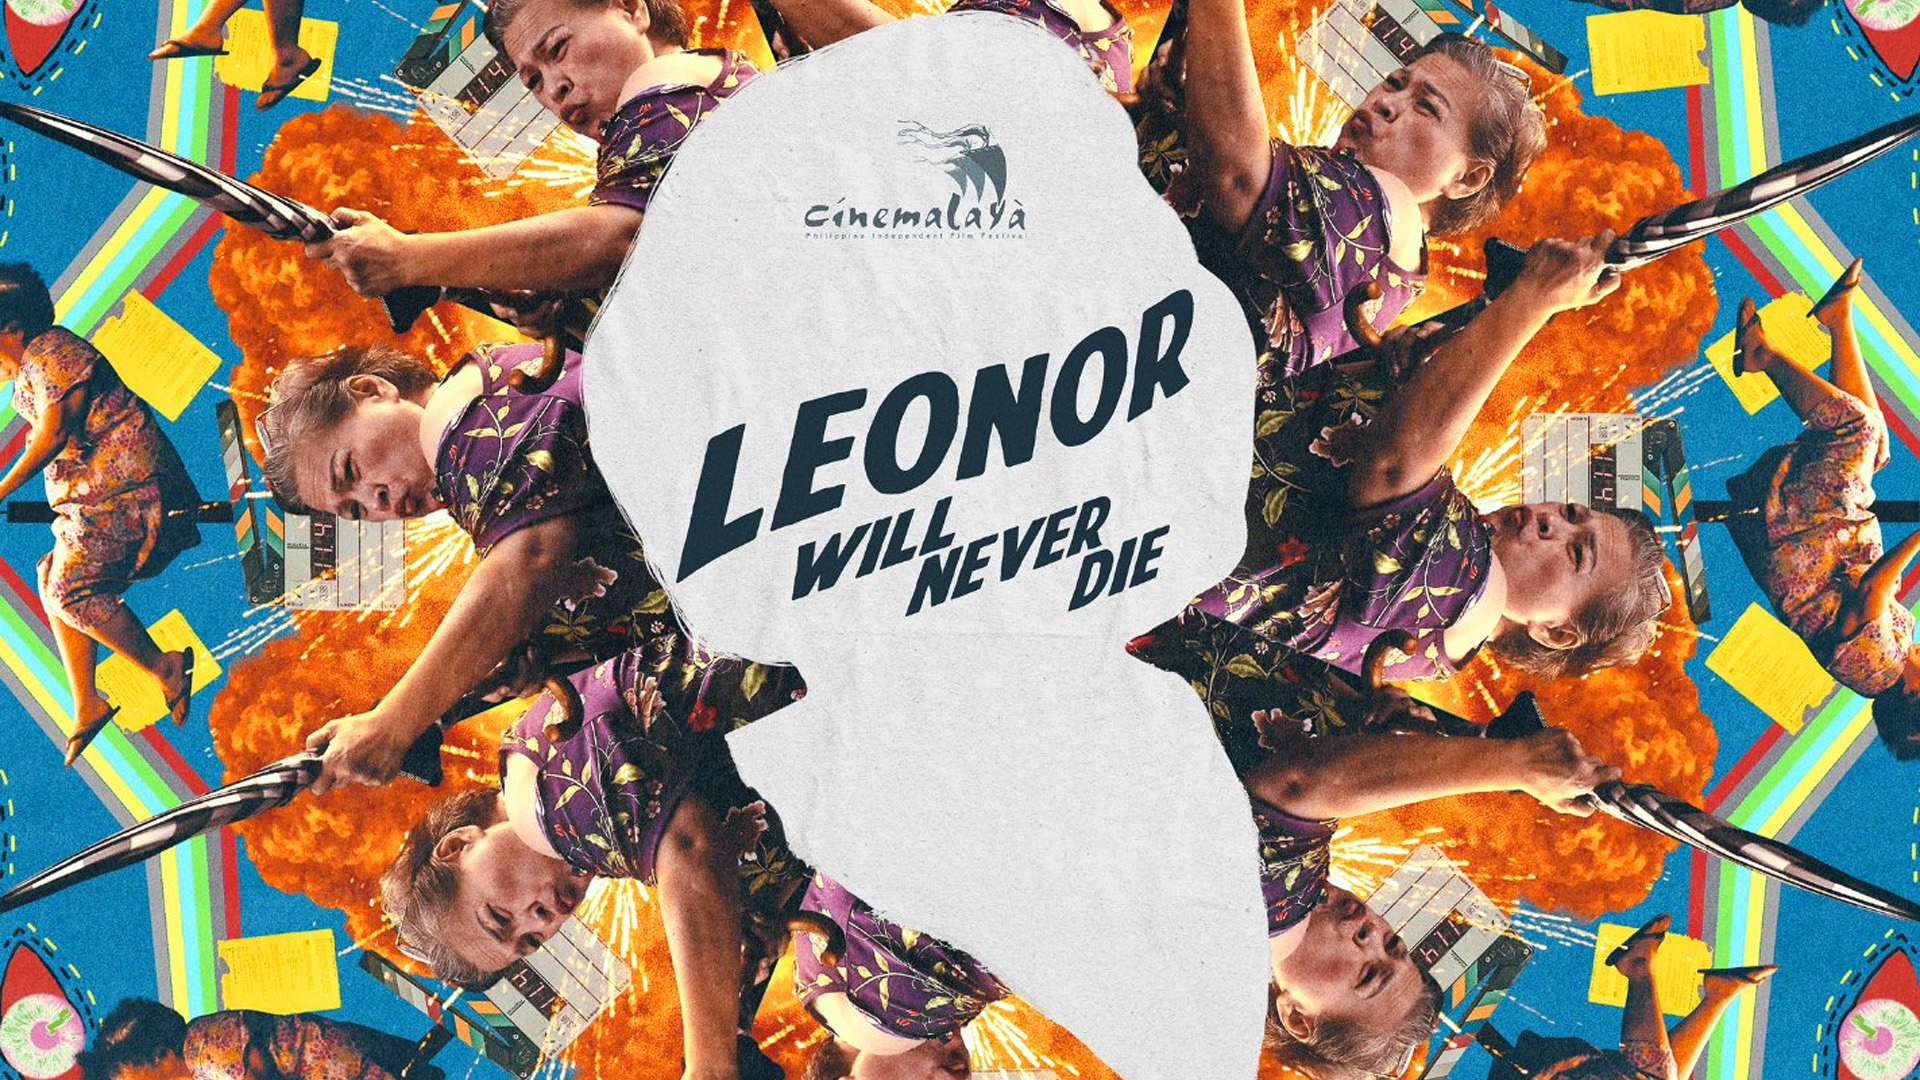 Leonor will never die poster